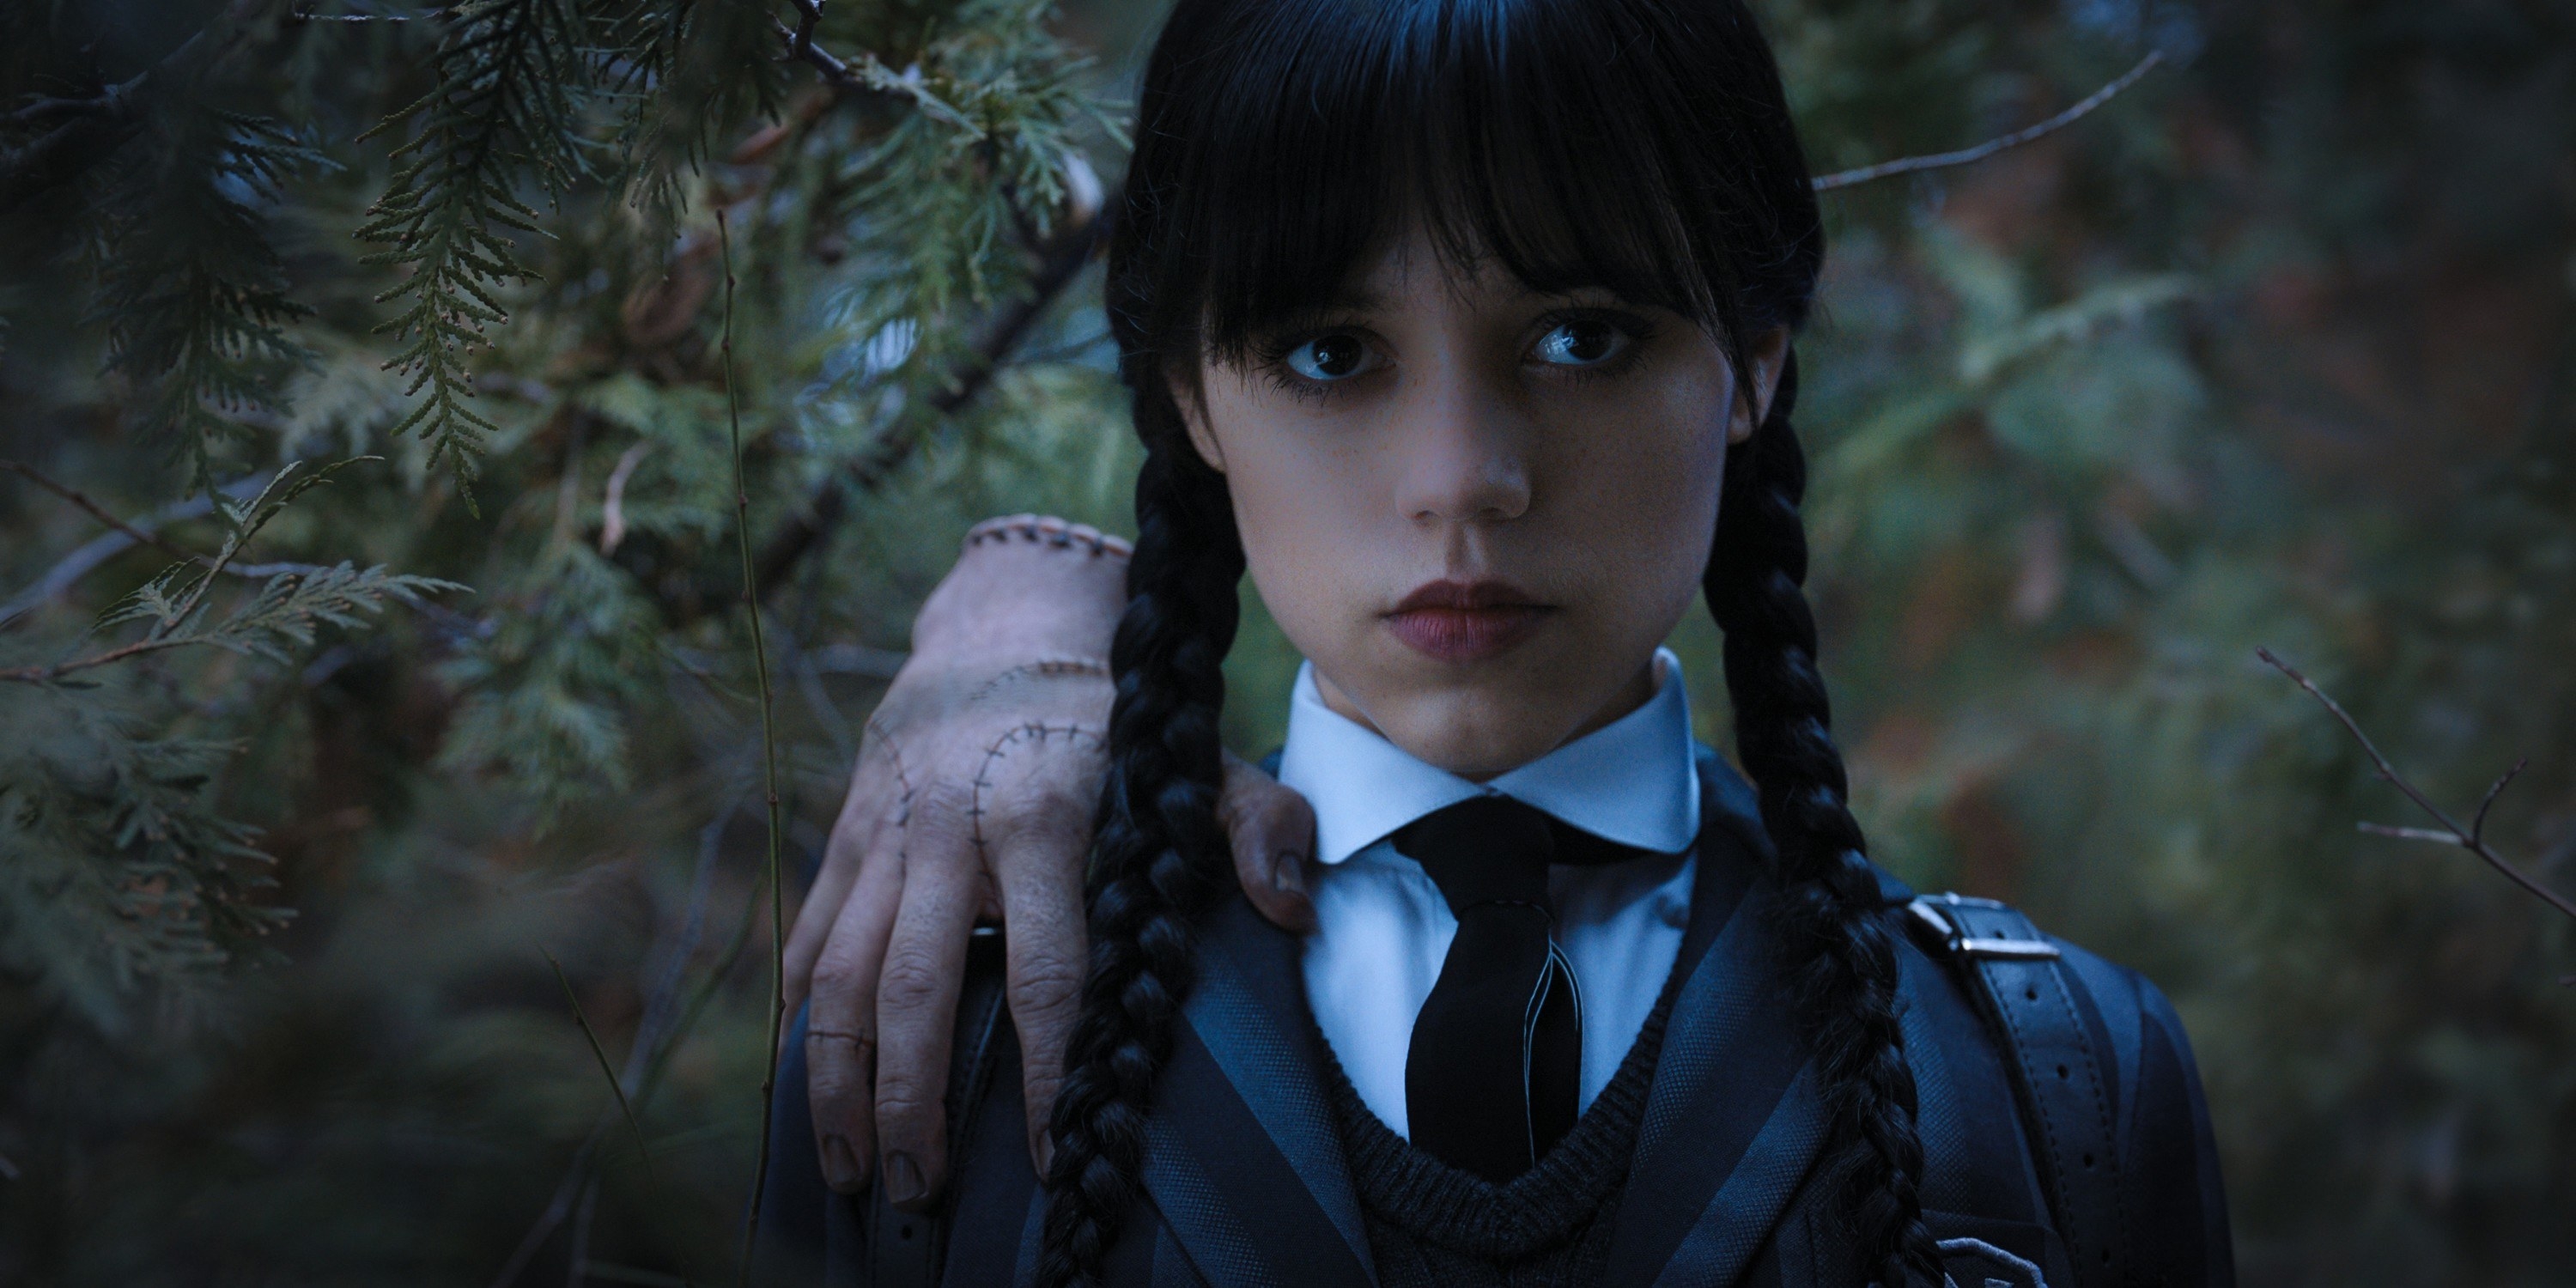 wednesday addams and the character thing on her shoulder